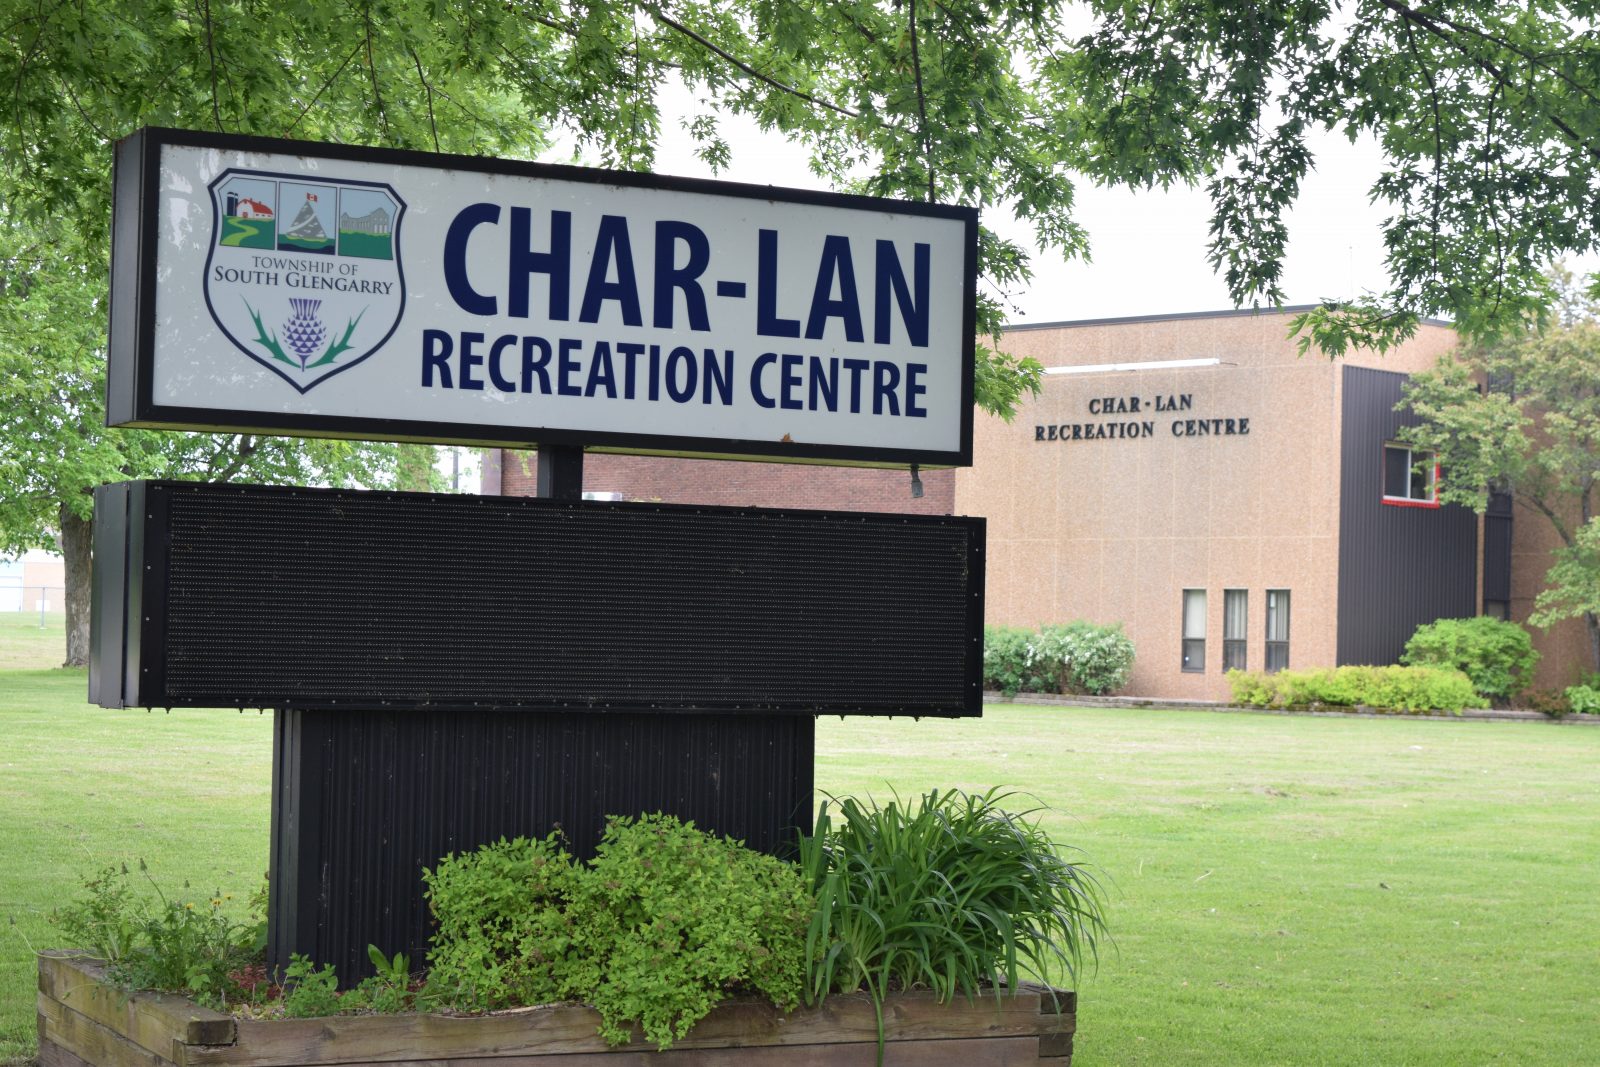 South Glengarry working on parks and recreation master plan